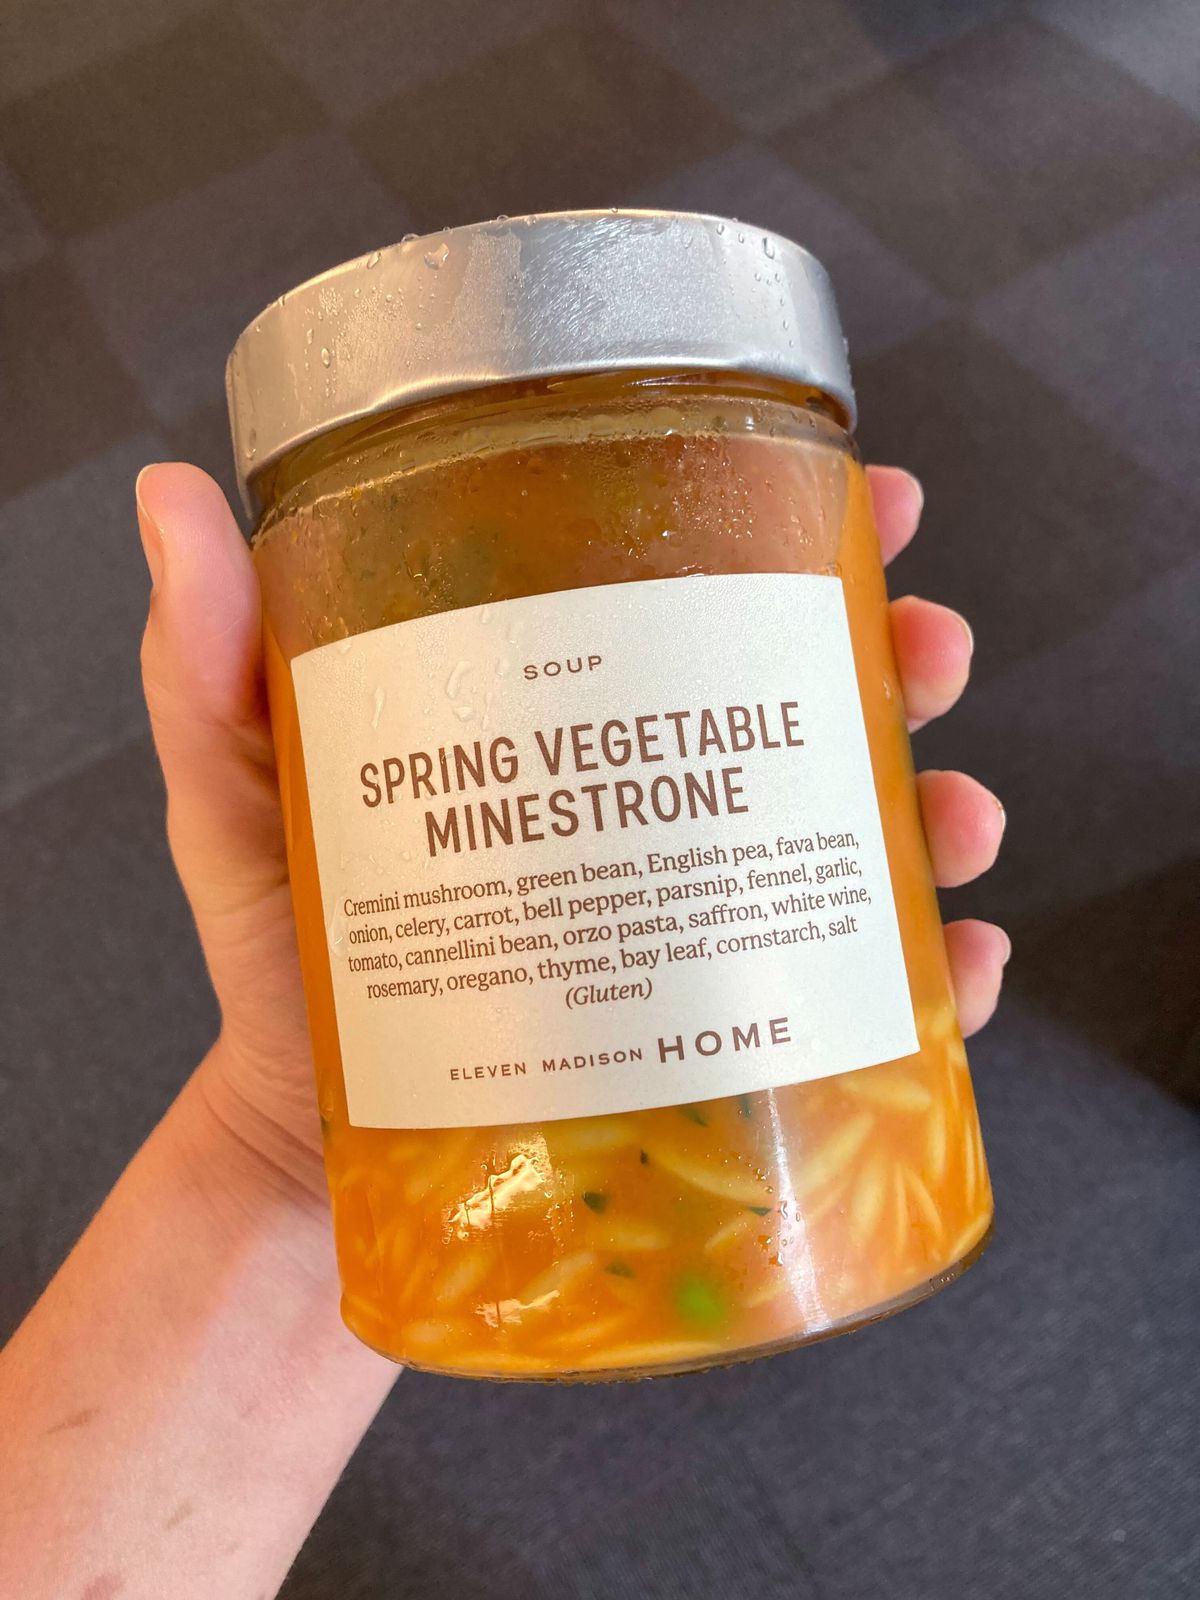 Hand holding up glass jar containing orange liquid and noodles; label on the jar reads “Spring Minestrone Soup” along with an ingredients list.